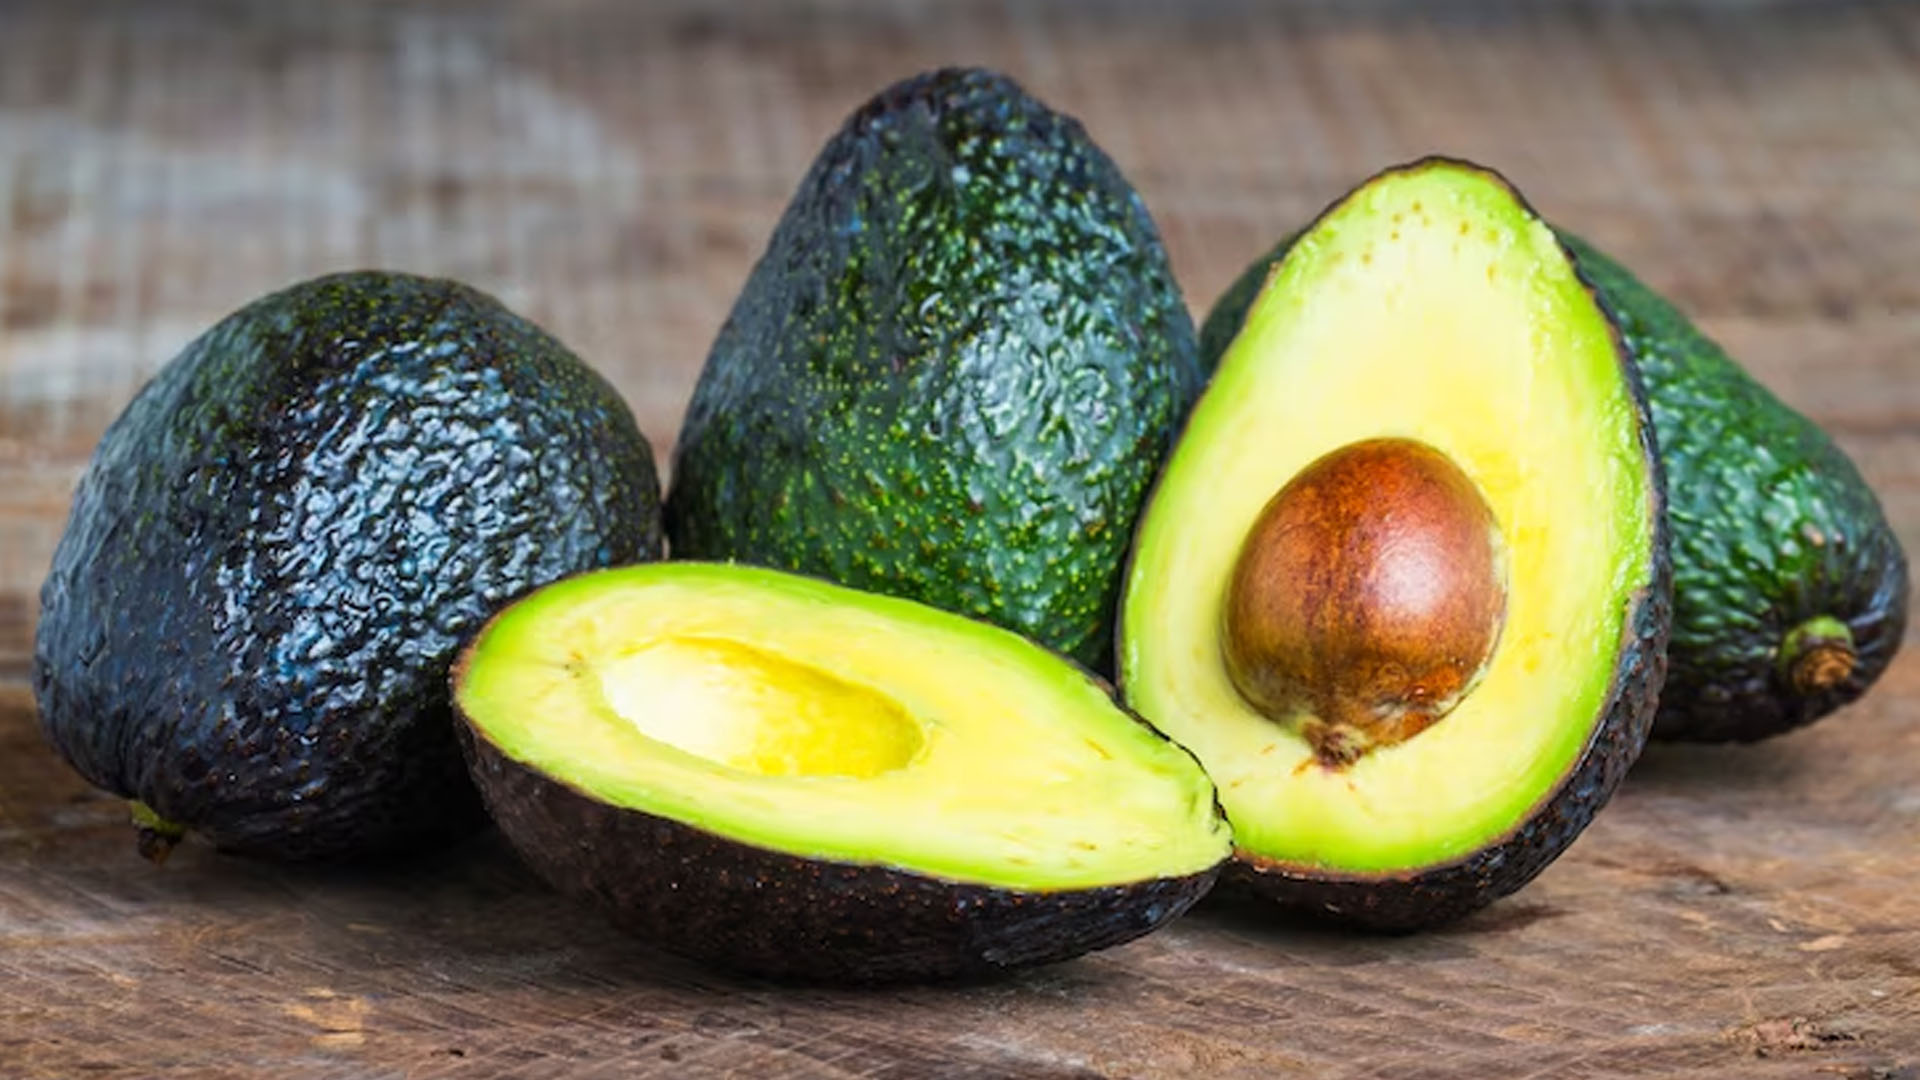 How To Use Avocado Seed For Health Benefits?